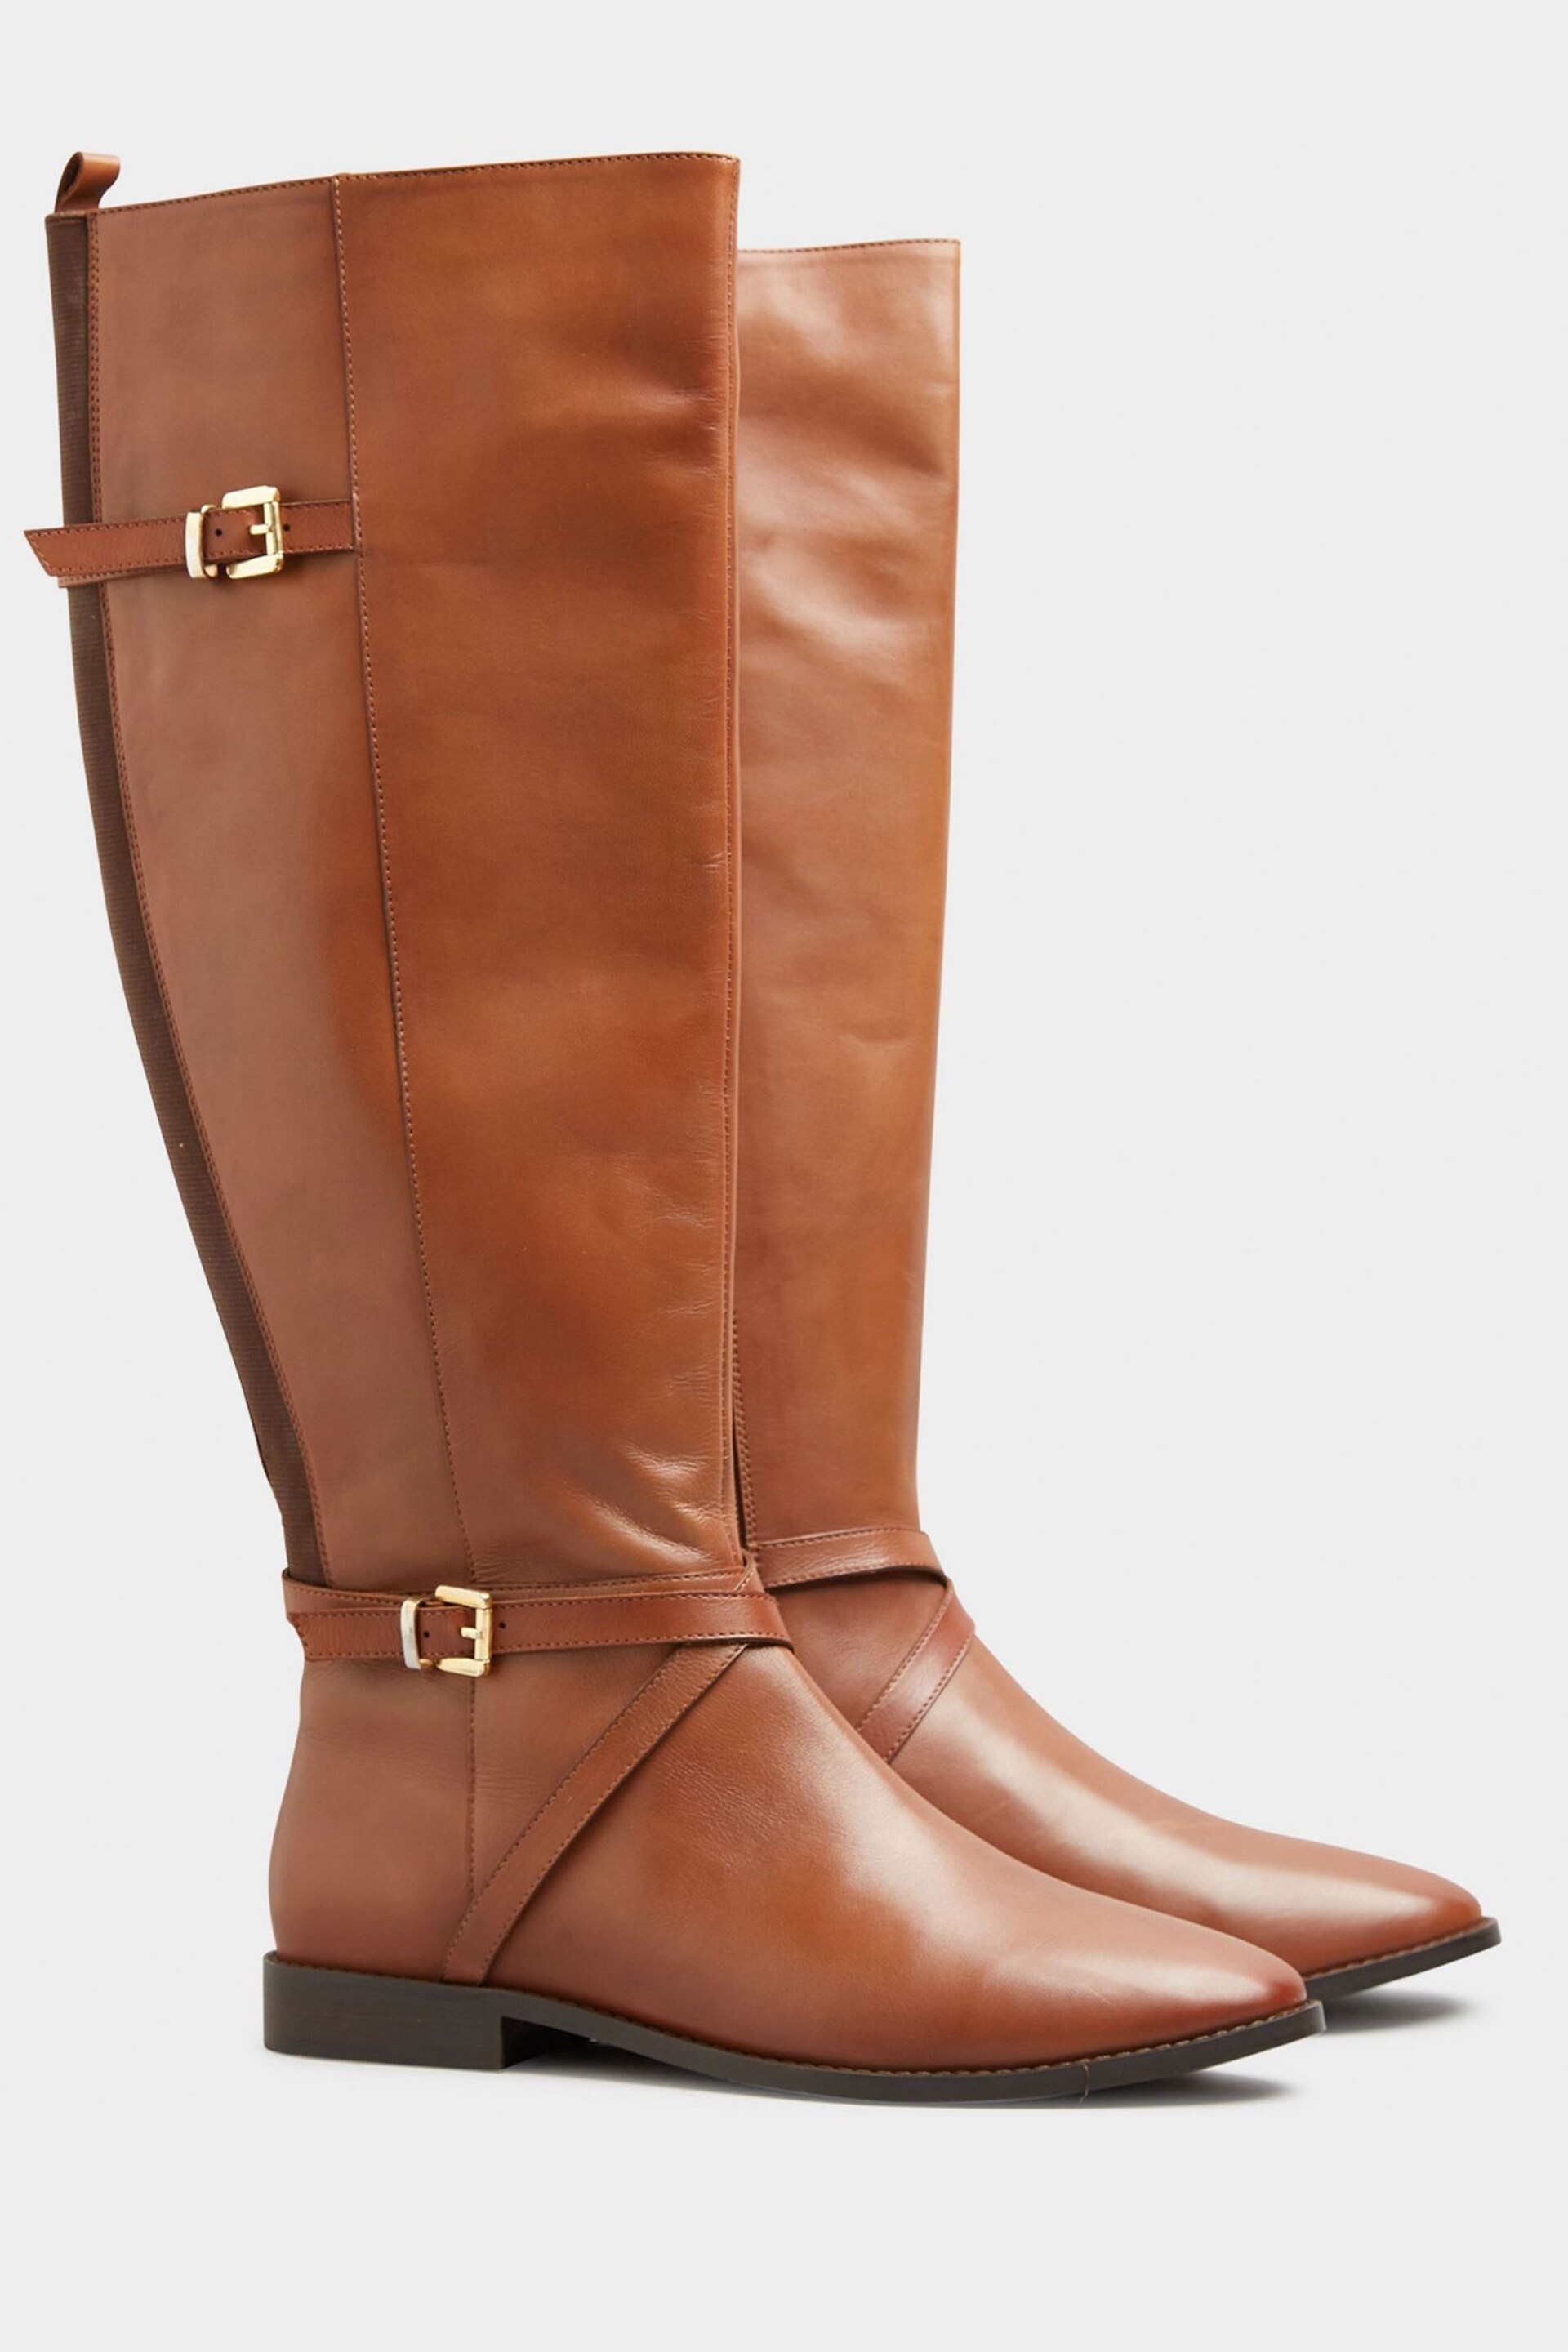 Long Tall Sally Brown Leather Riding Boots - Image 4 of 5